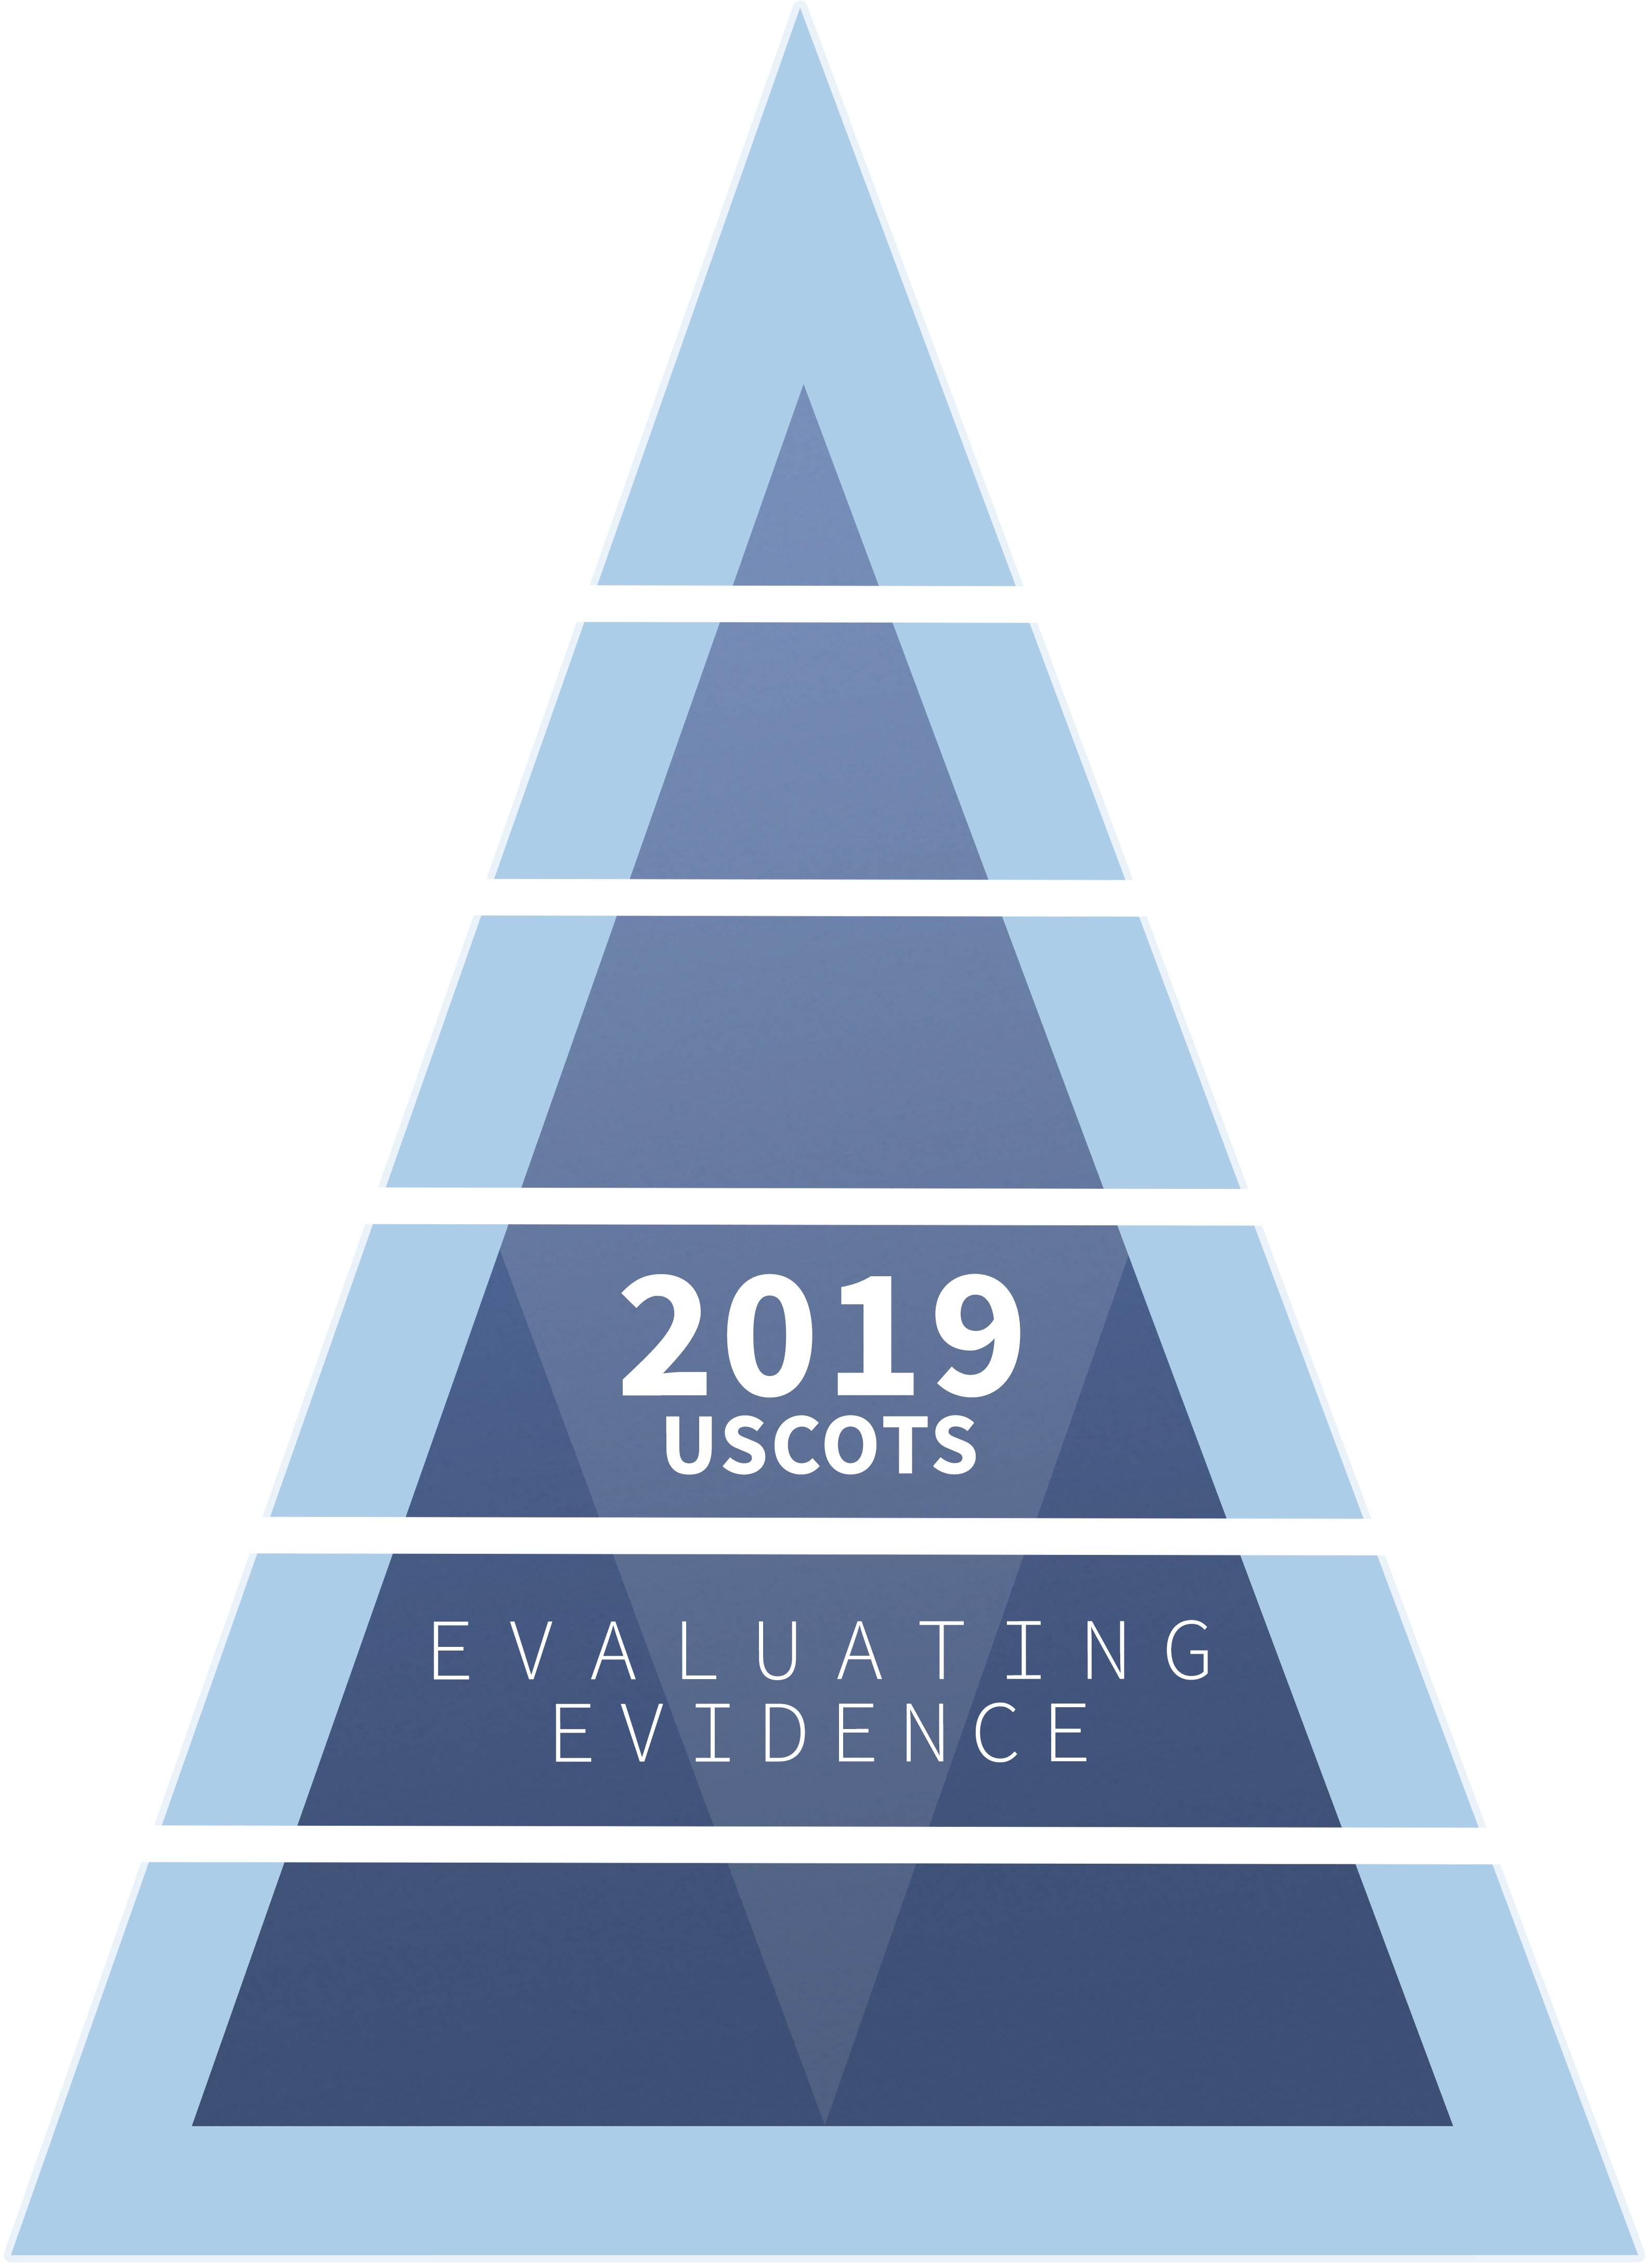 USCOTS 2019 - Evaluating Evidence